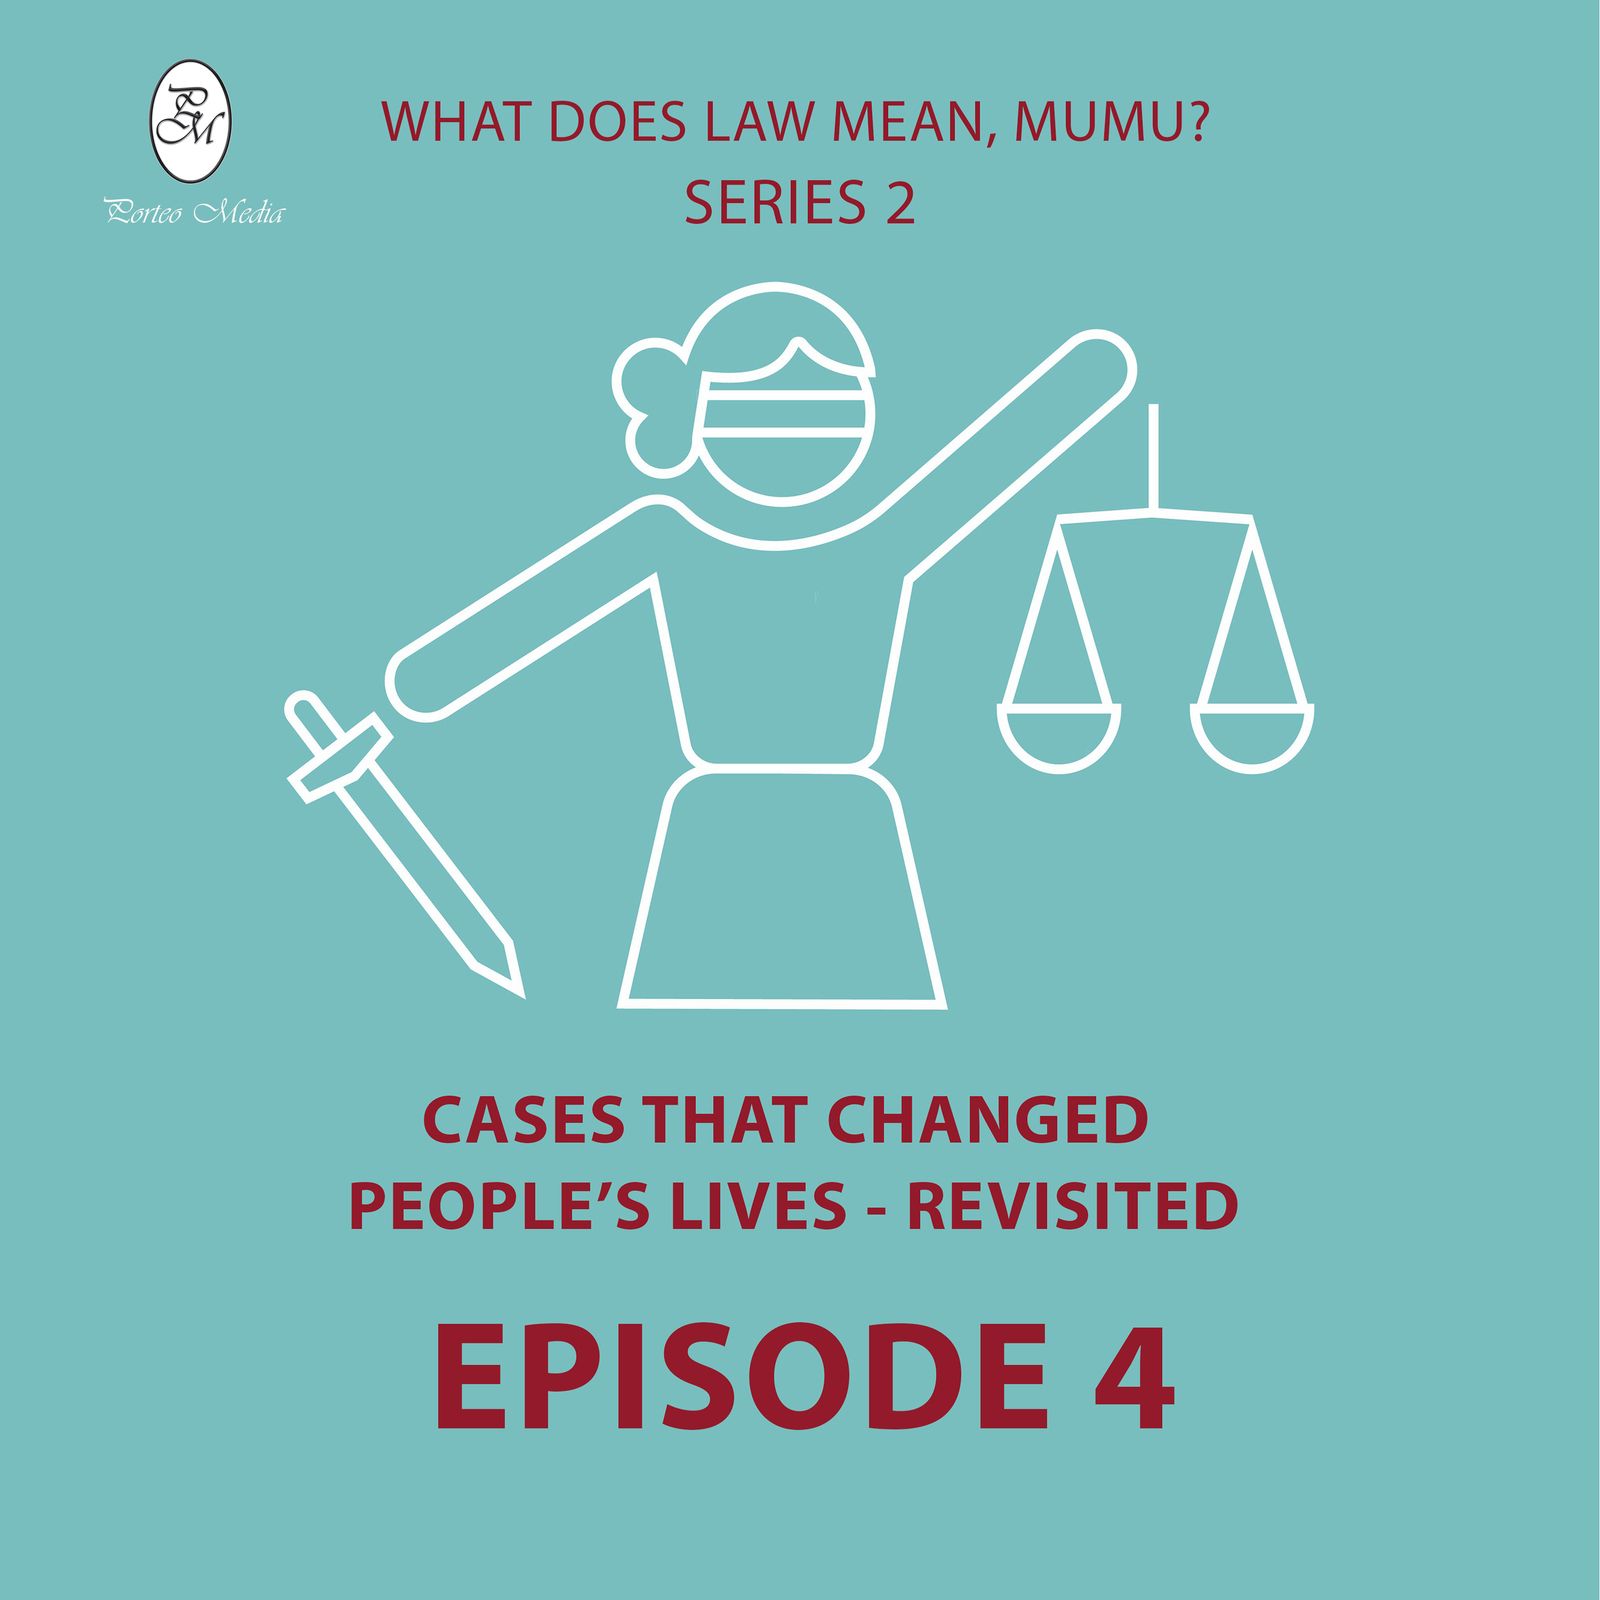 S2 Ep2: Episode 4. Cases That Changed People's Lives - Revisited: "Byrne v Ireland"